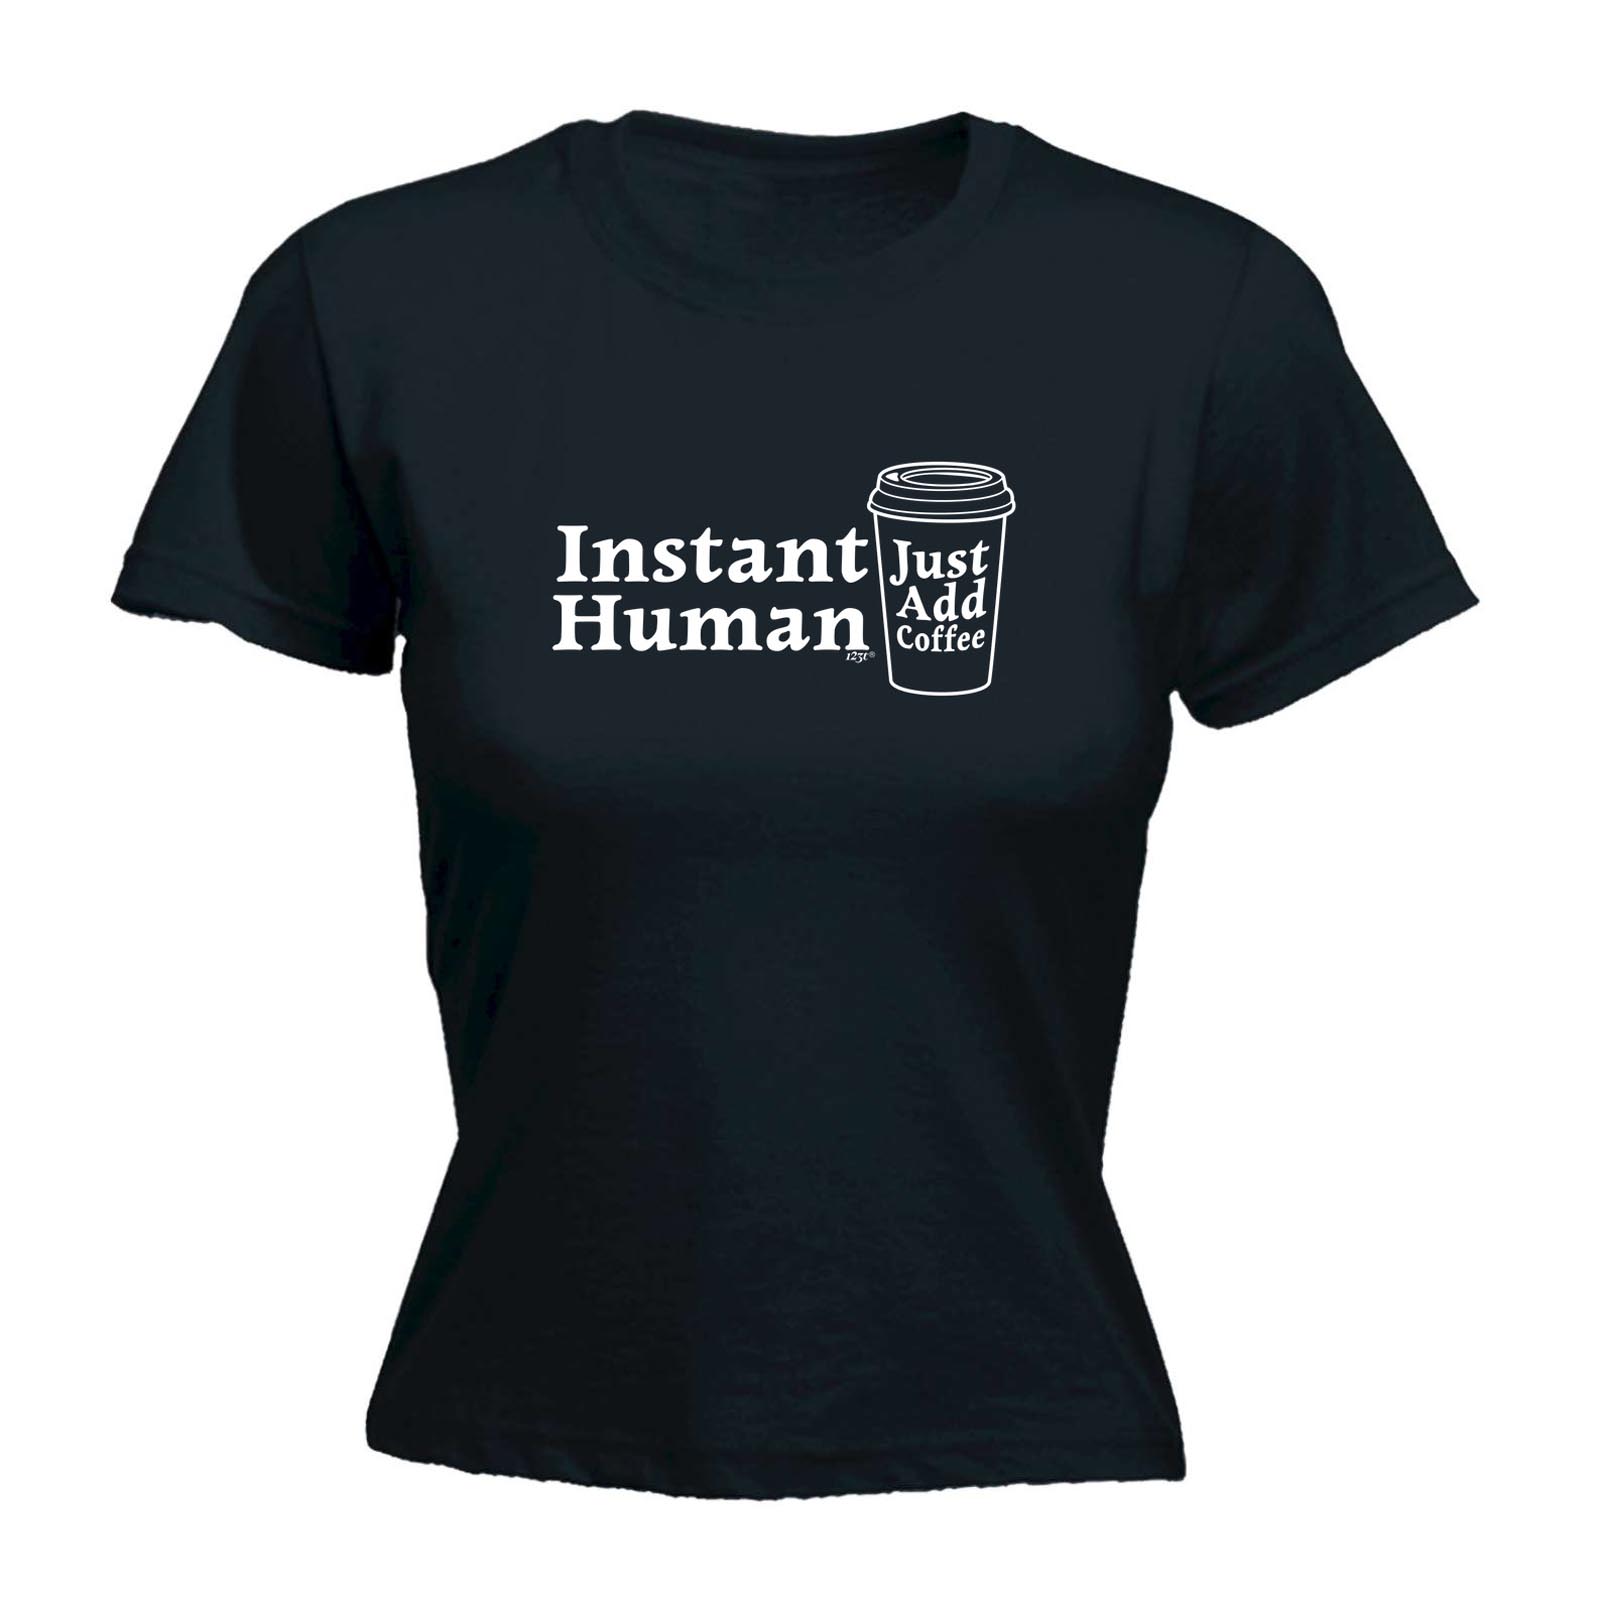 Instant Human Just Coffee Funny Novelty Tops T-Shirt Womens tee TShirt 